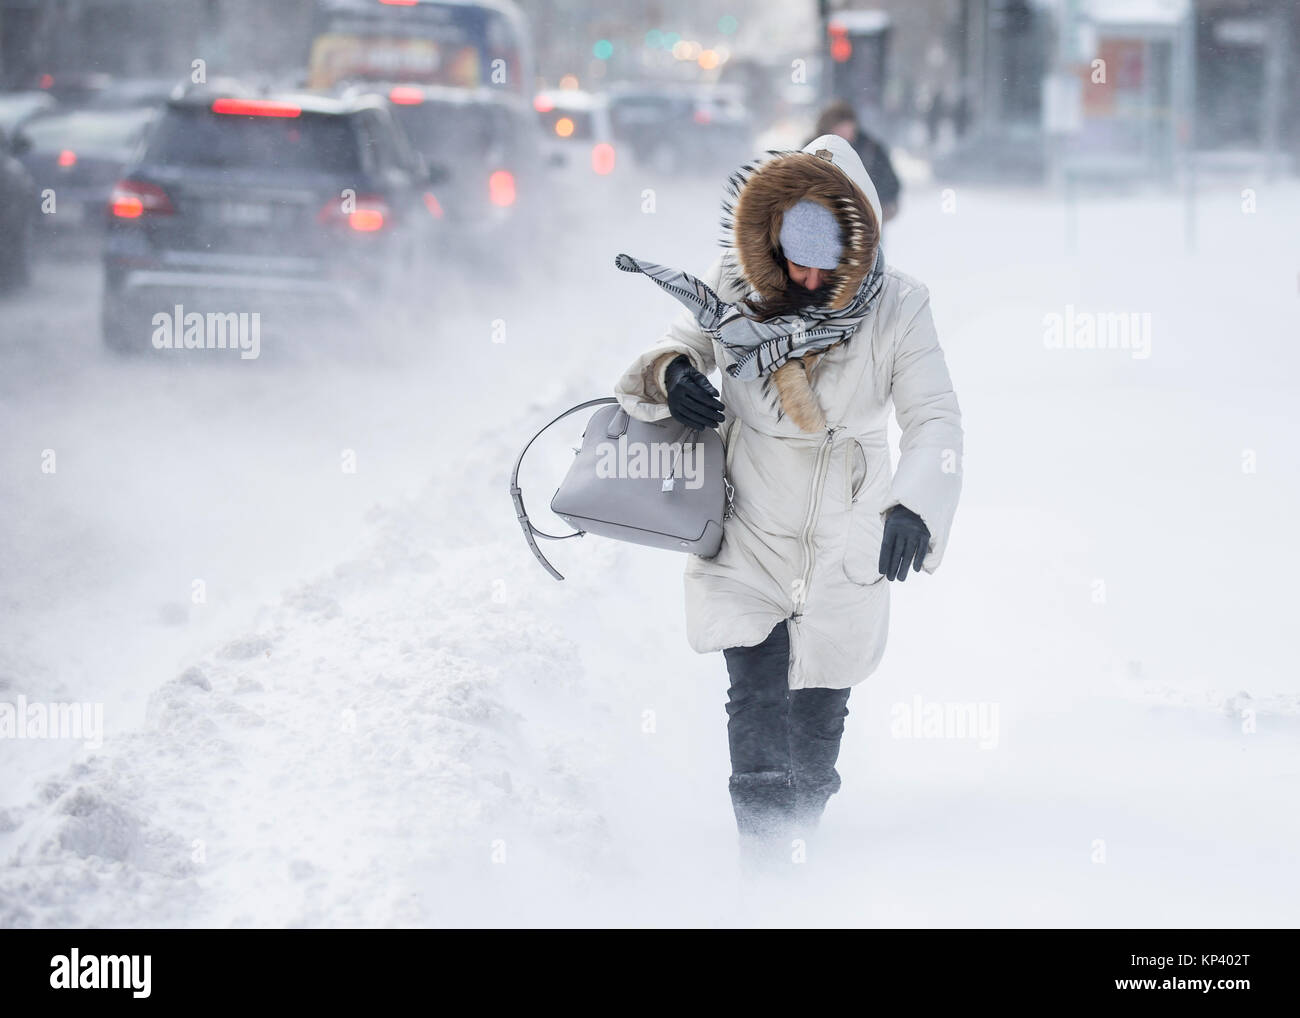 Montreal, Canada. 13th December, 2017. A woman is caught in a sudden gust of wind as she walks on Rene-Levesque boulevard in downtown Montreal, Quebec, Canada, after a snowstorm on Wednesday, December 13, 2017. Credit: Dario Ayala/Alamy Live News Stock Photo